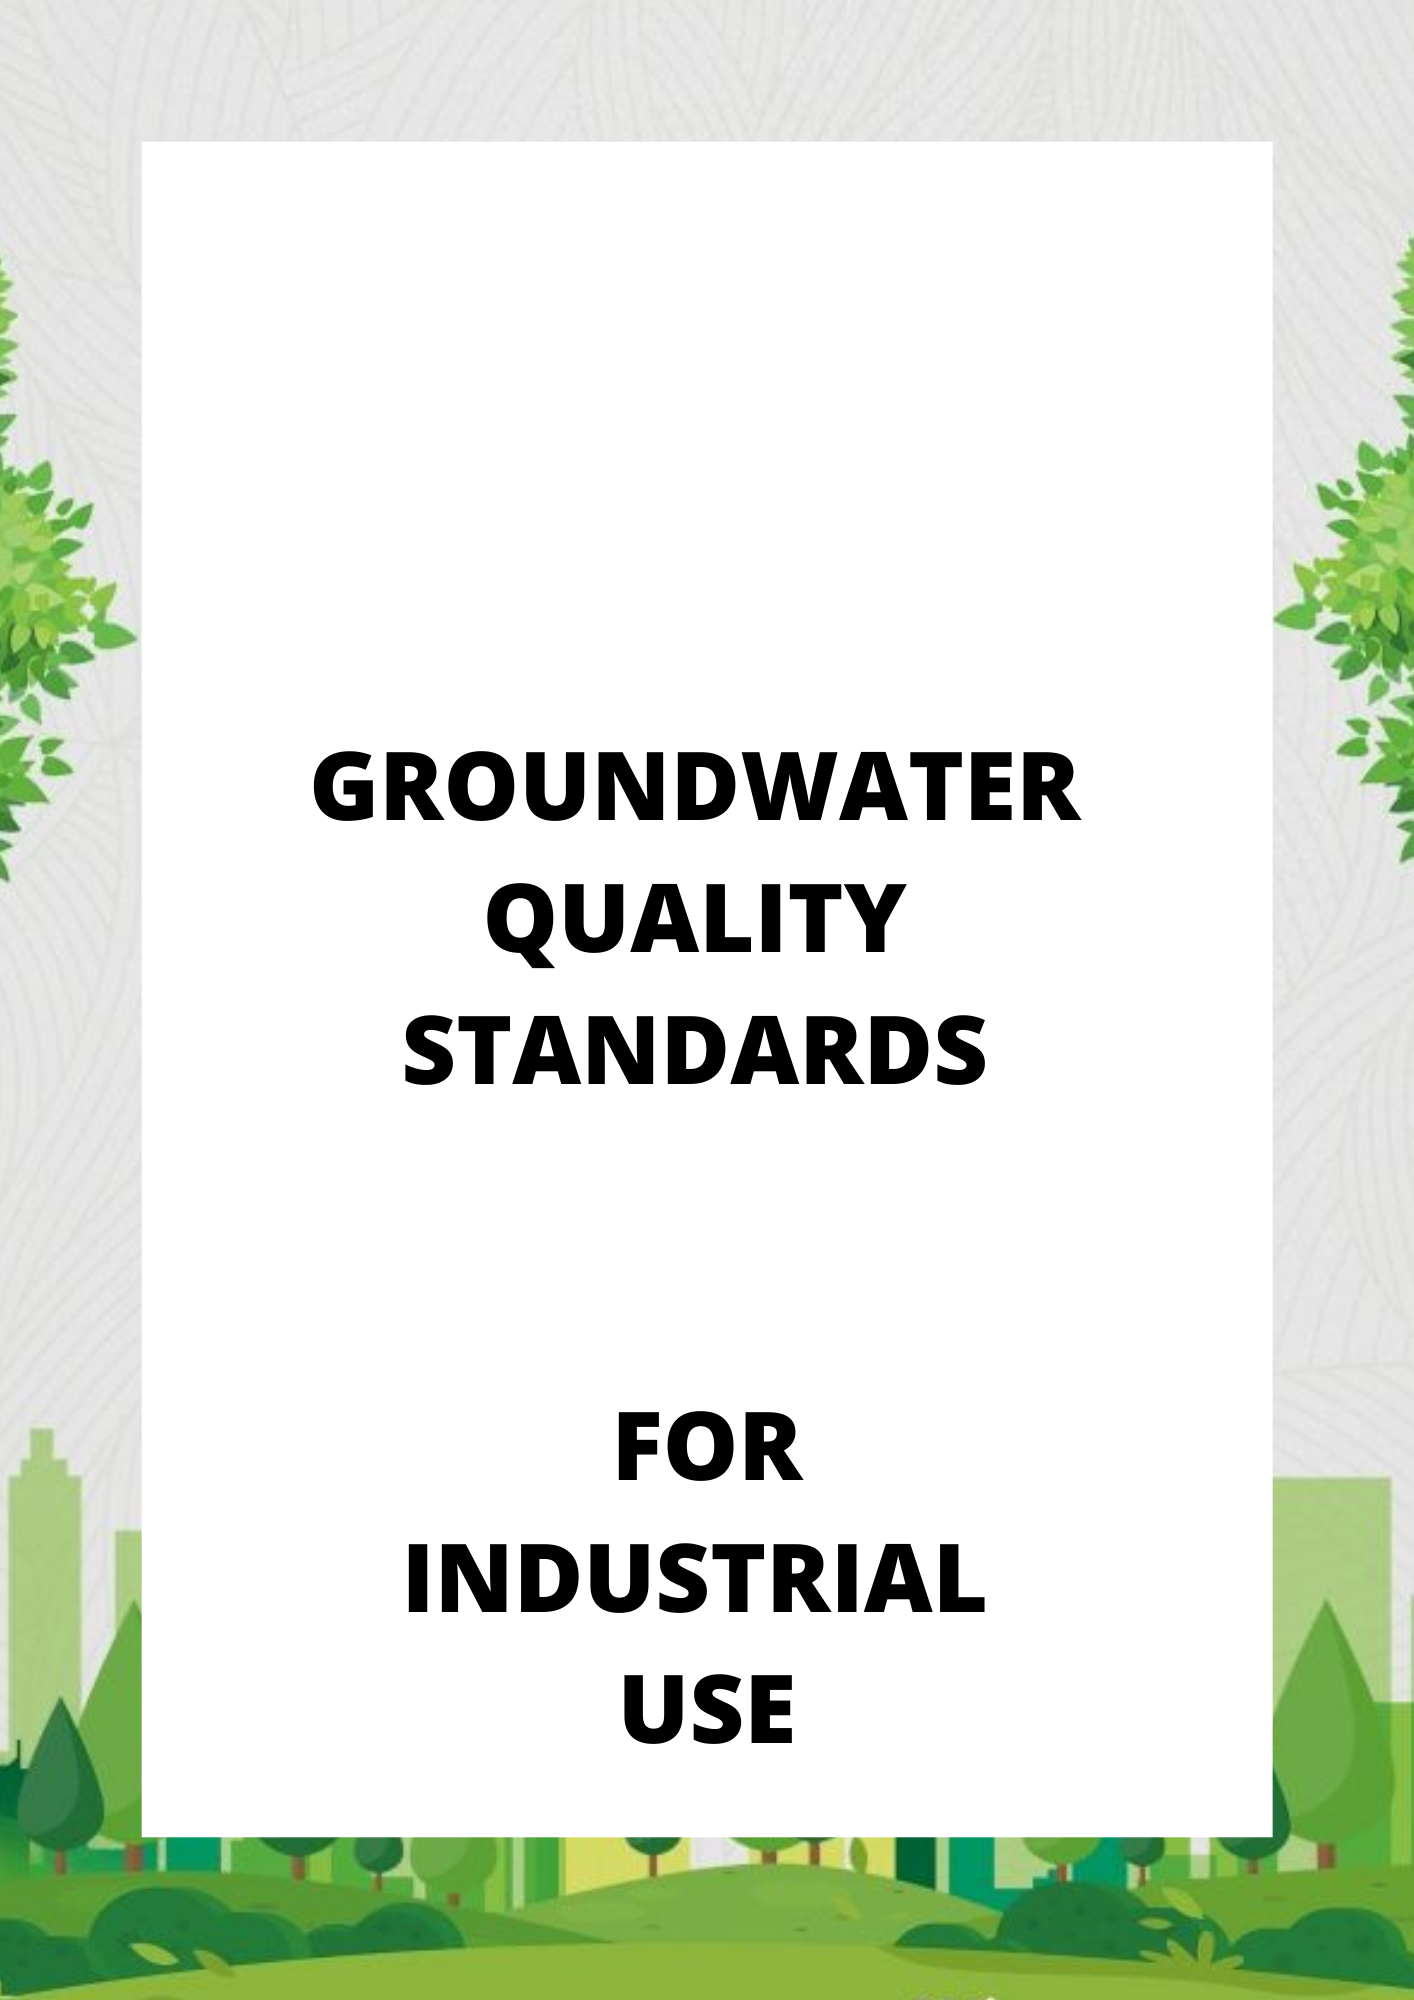 GROUNDWATER QUALITY STANDARDS - FOR INDUSTRIAL USE